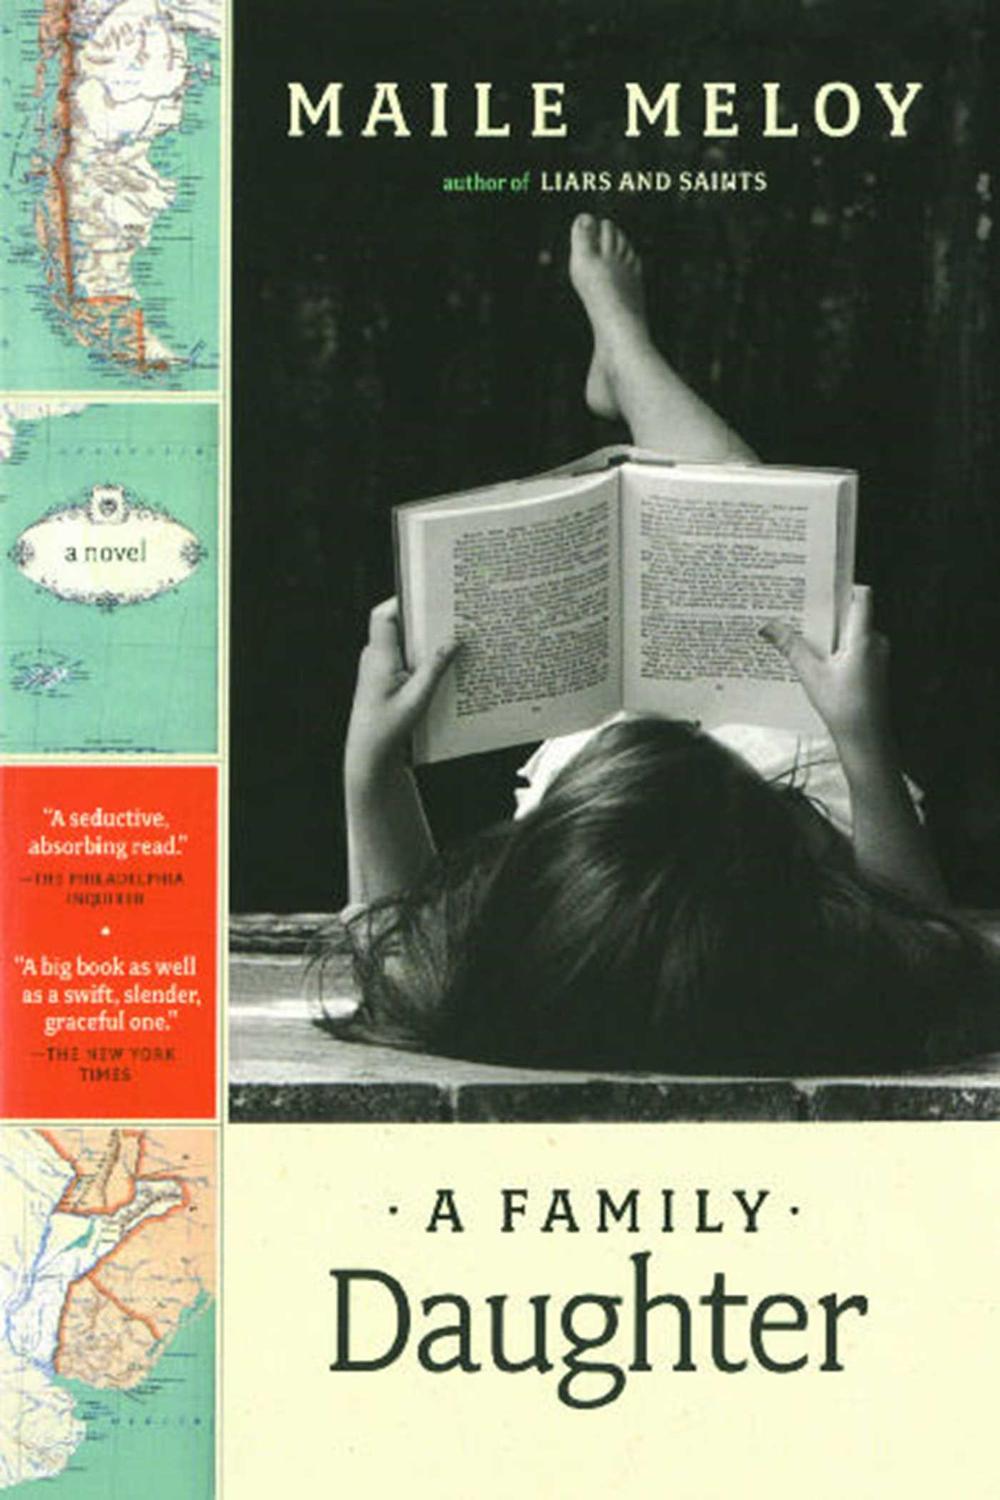 A Family Daughter - Maile Meloy